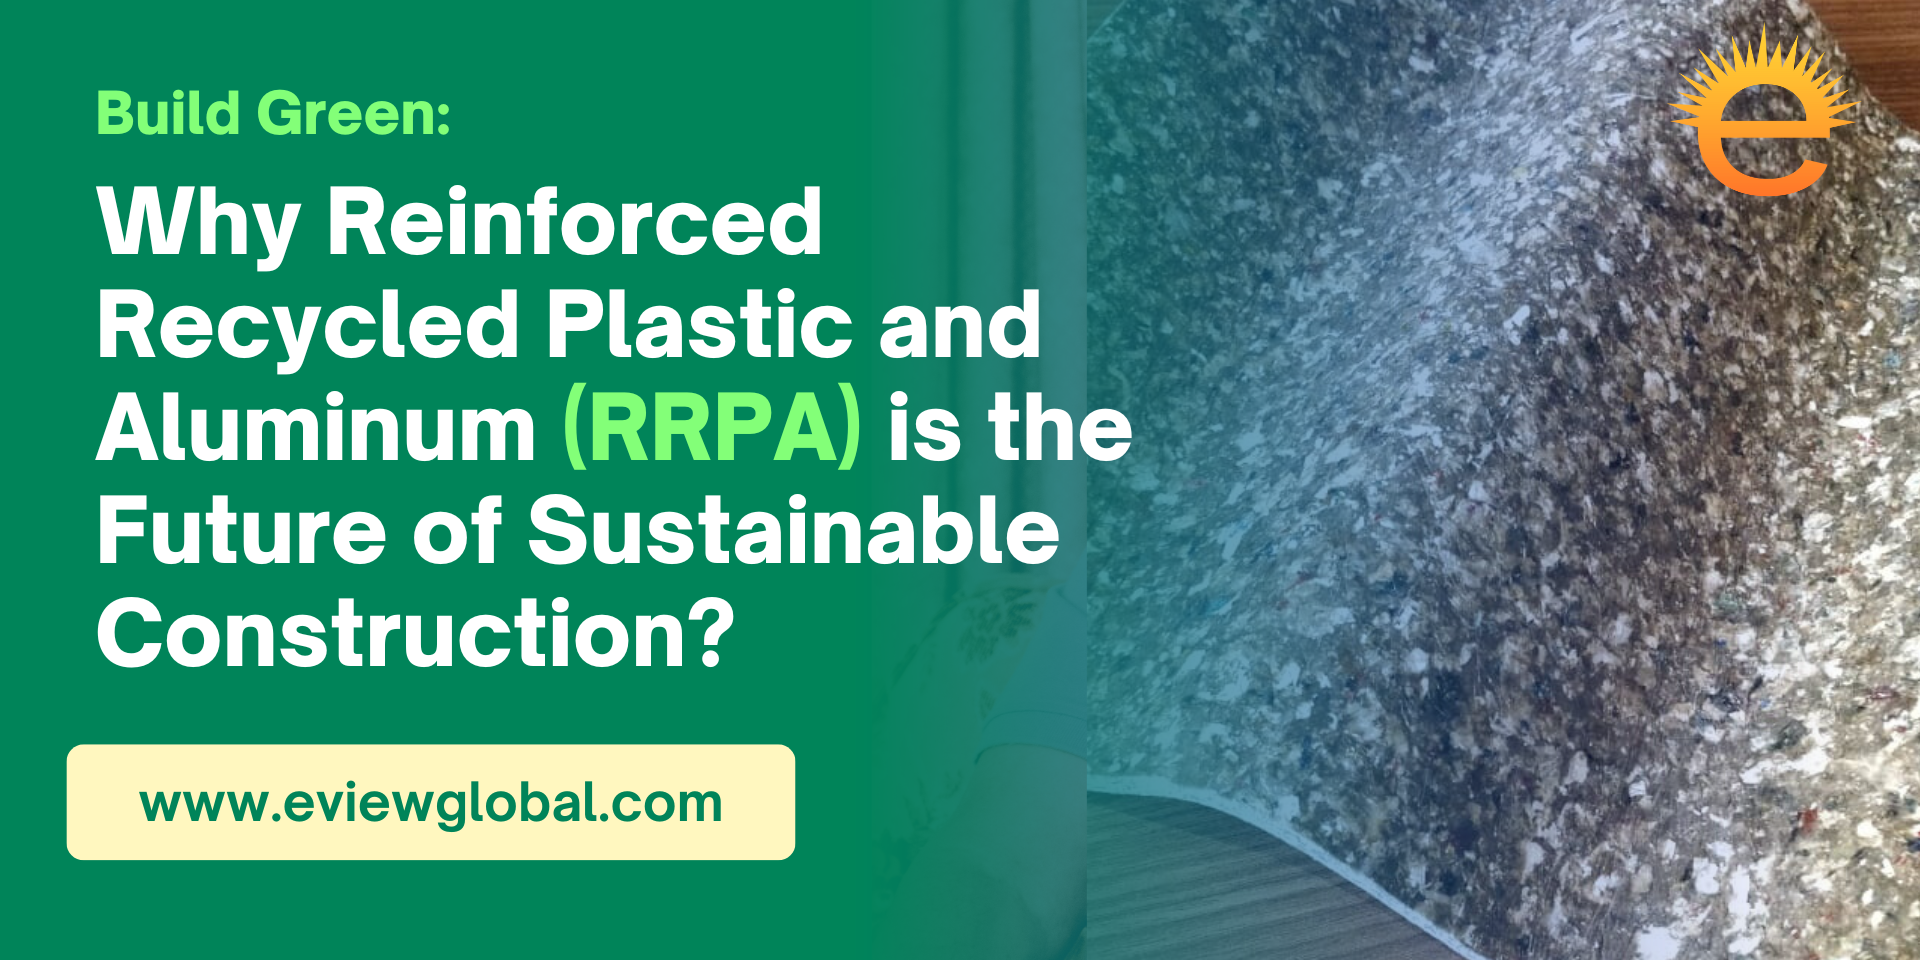 Build Green: Why Reinforced Recycled Plastic and Aluminum (RRPA) is the Future of Sustainable Construction?